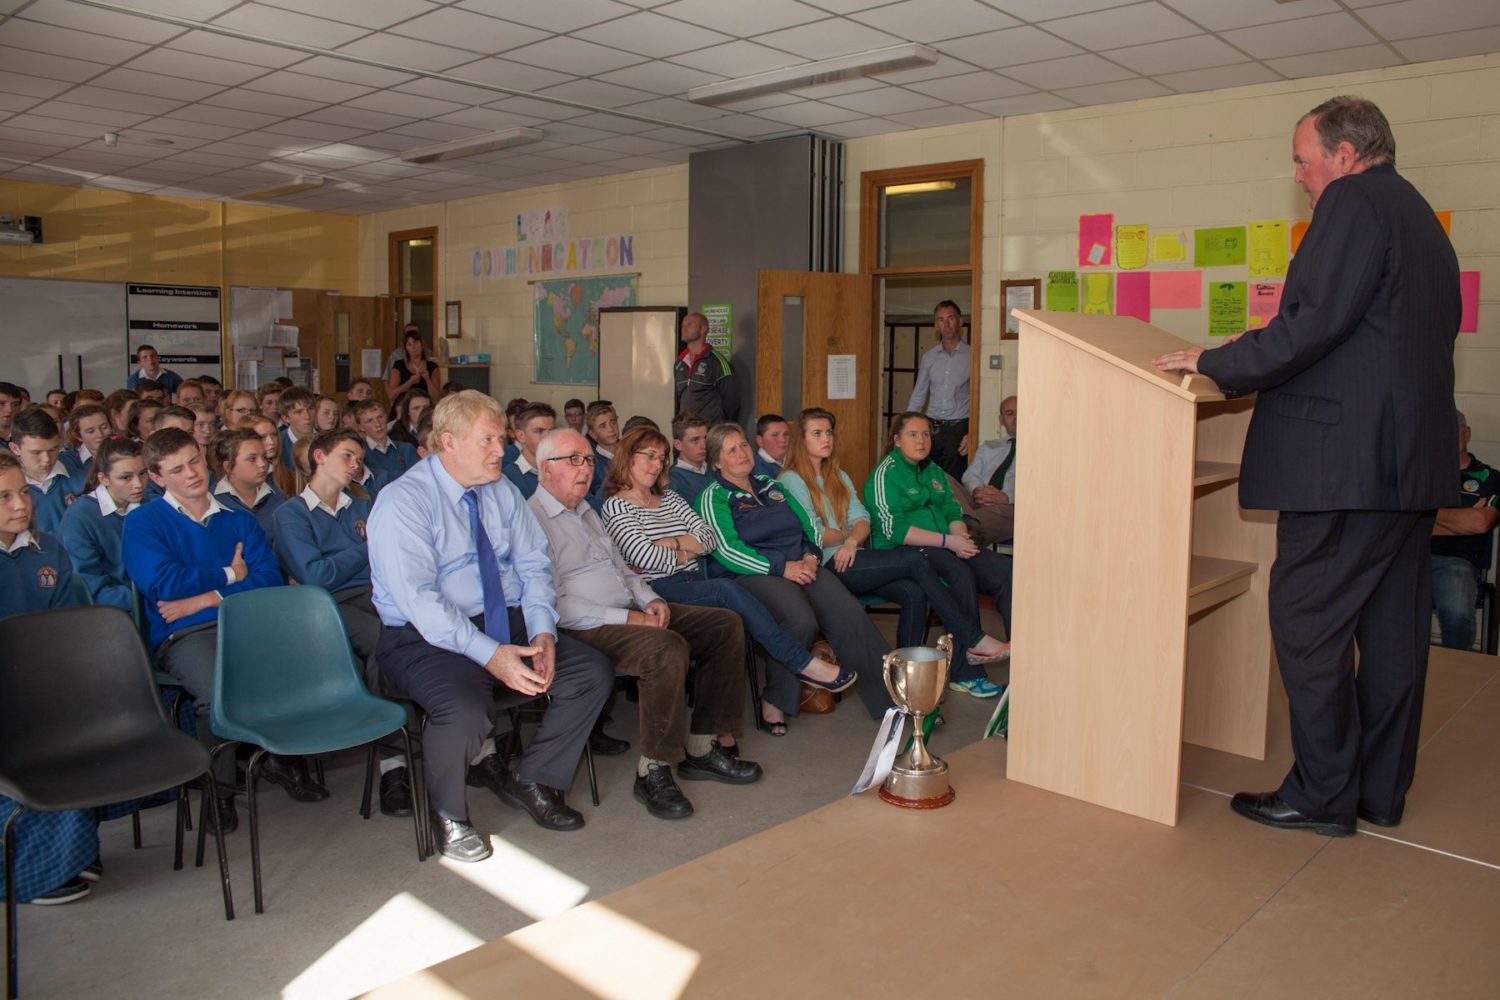 Desmond College was visited by GAA president Liam O'Neill September 2014